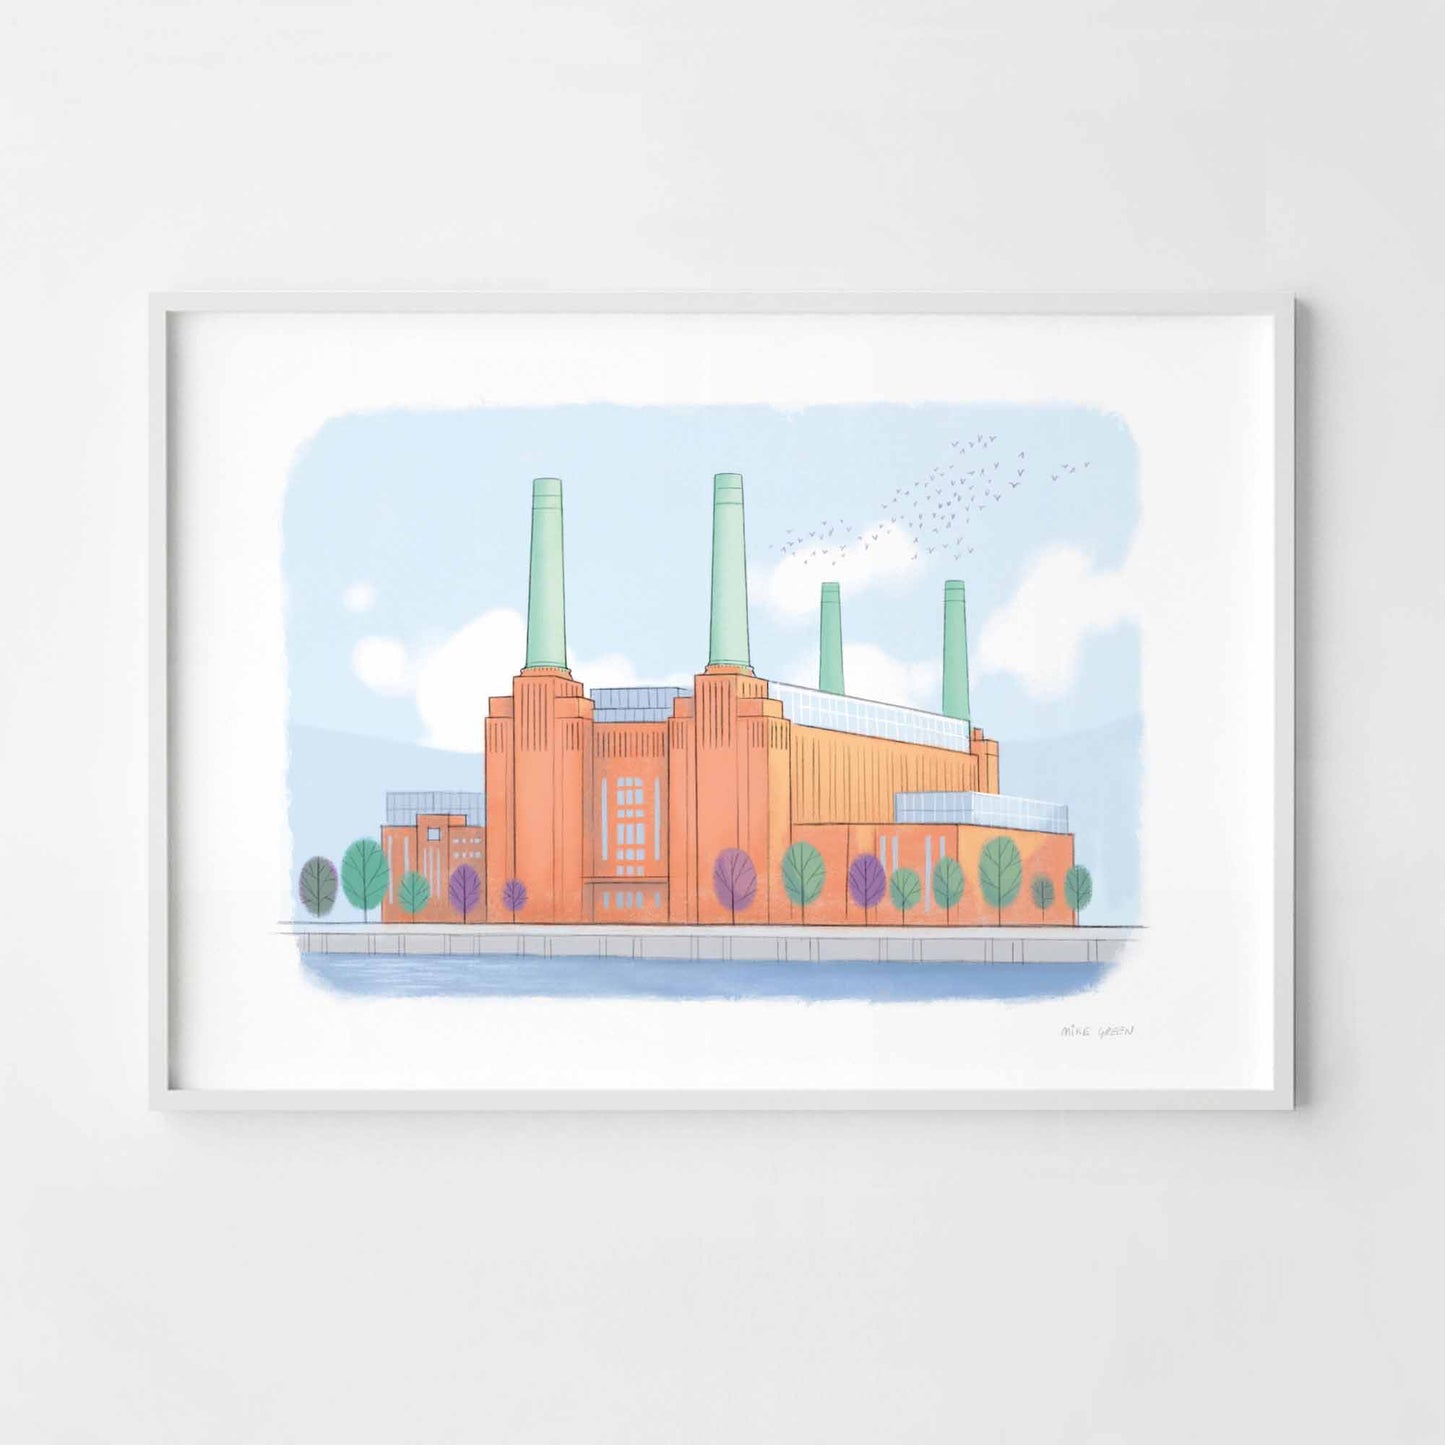 A print of London's Battersea Power Station beautifully illustrated by Mike Green.